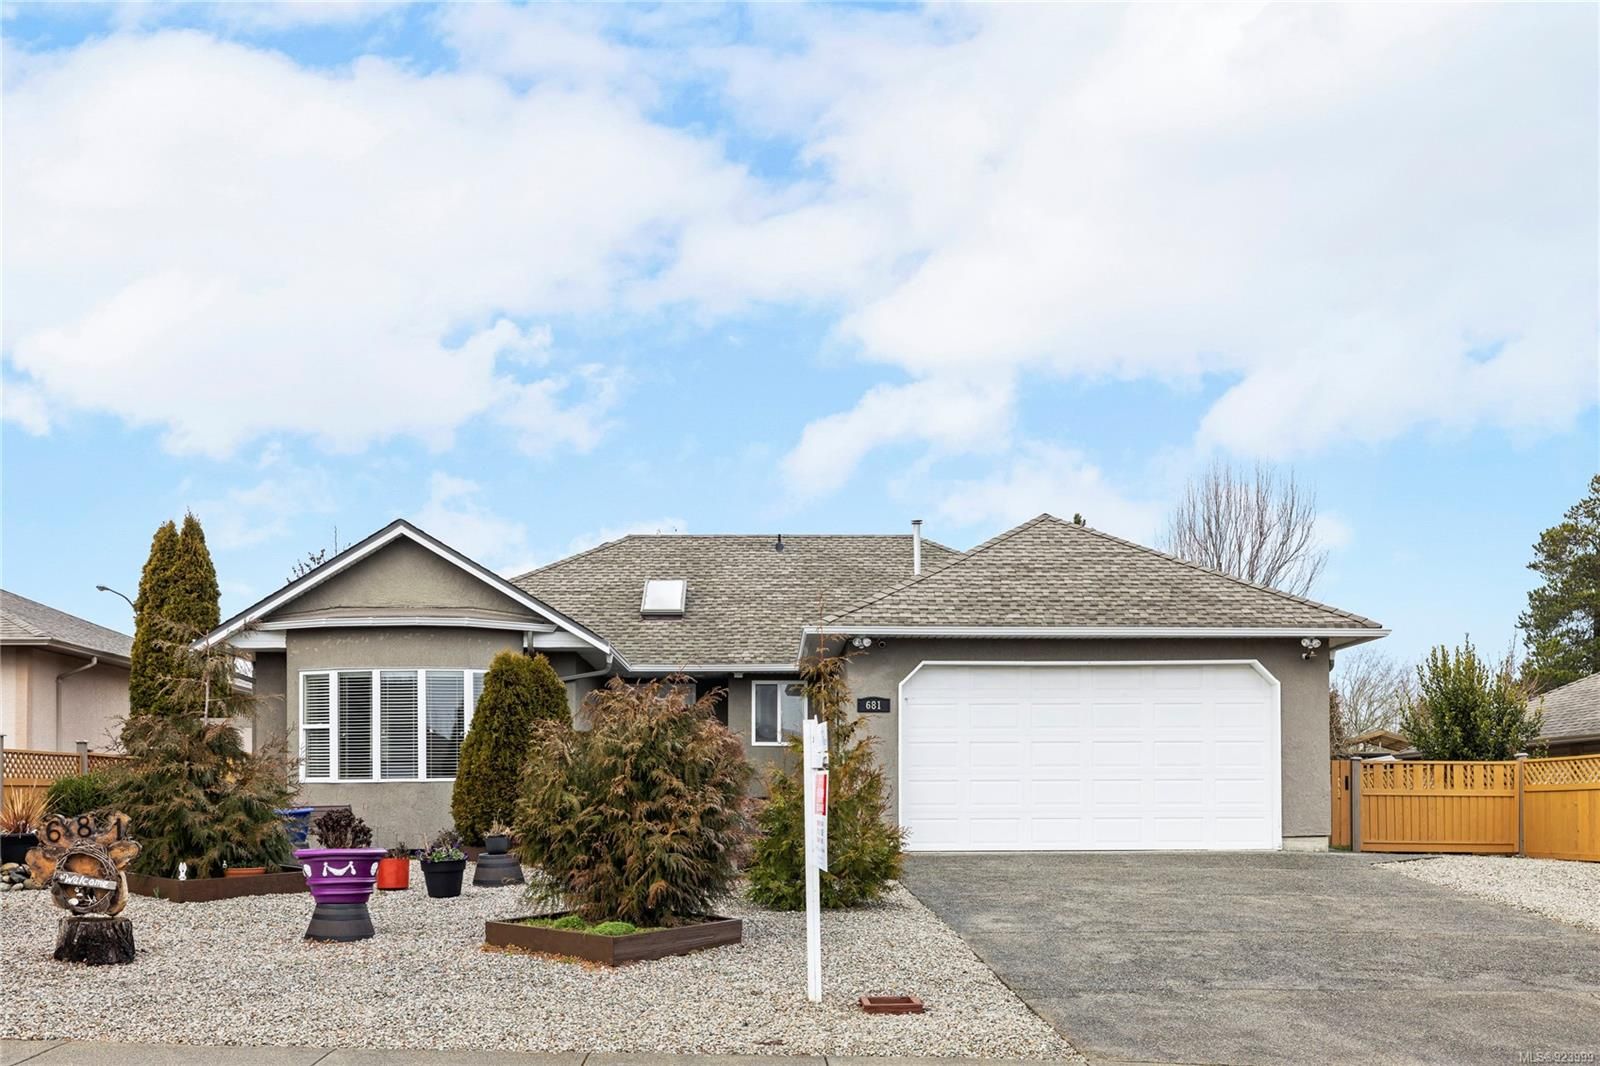 I have sold a property at 681 Ironwood Ave in Parksville
